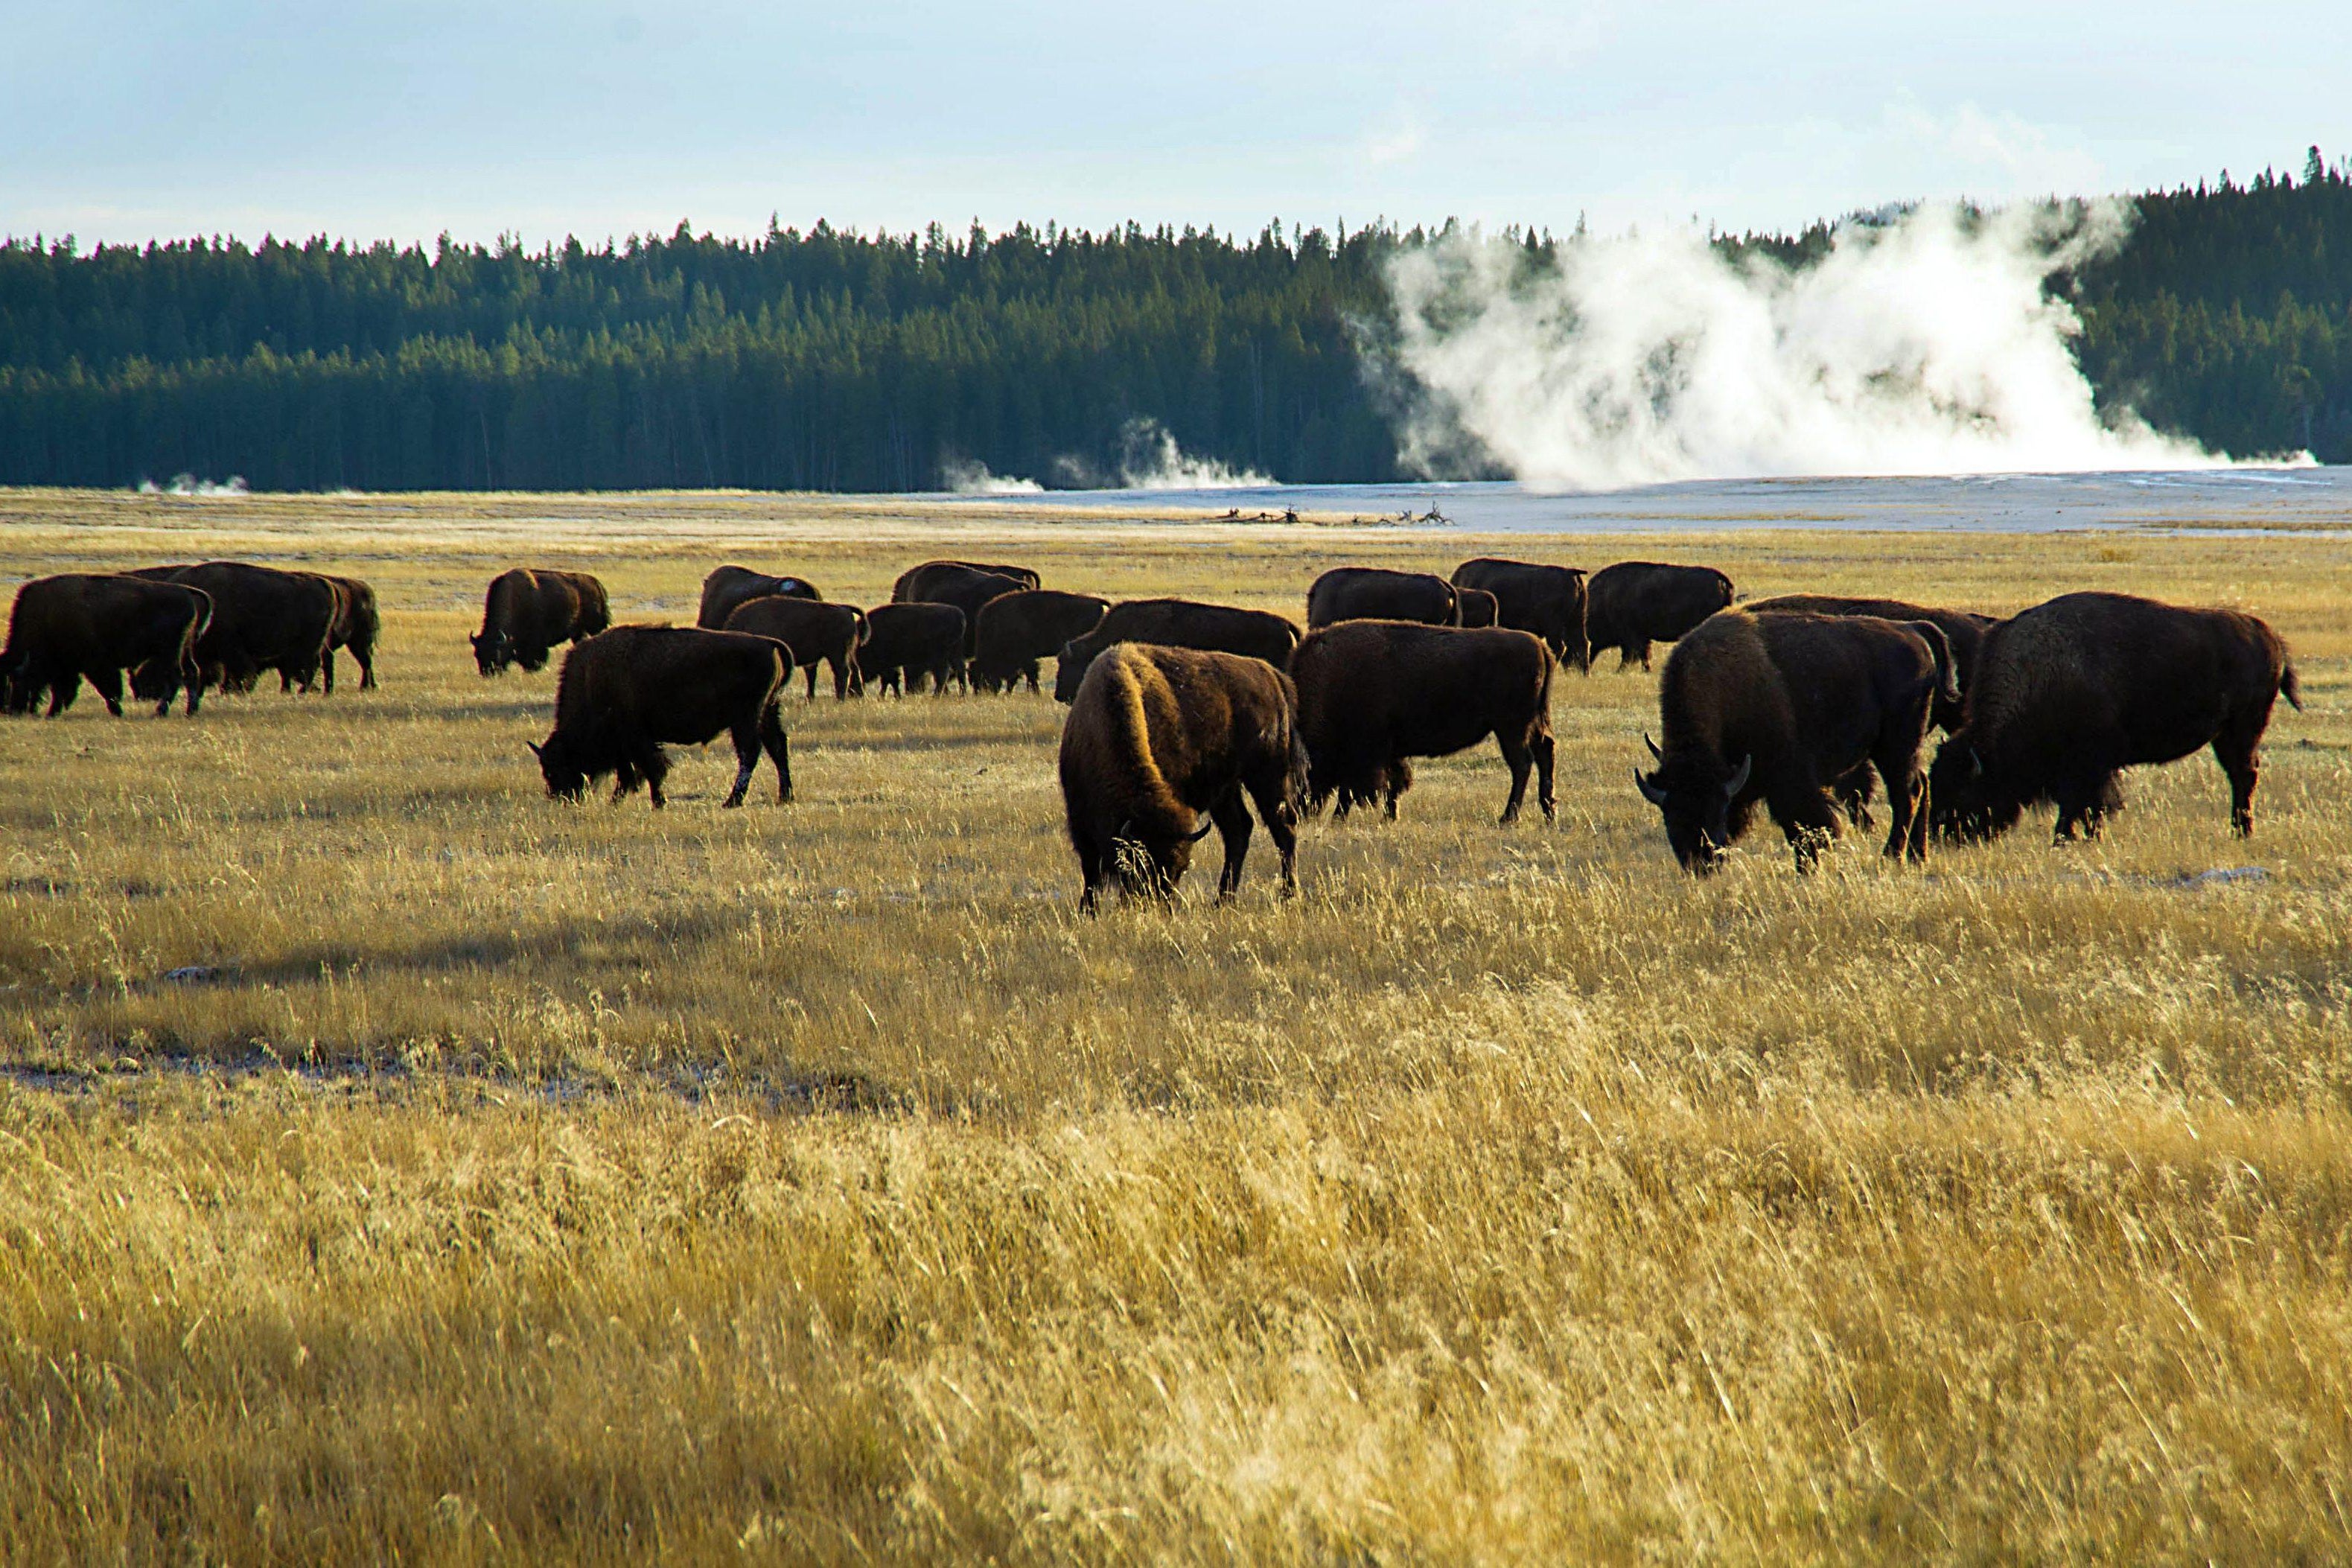 A small herd of bison graze in a field of yellow grass. In the background, you can see the steam from a geyser.